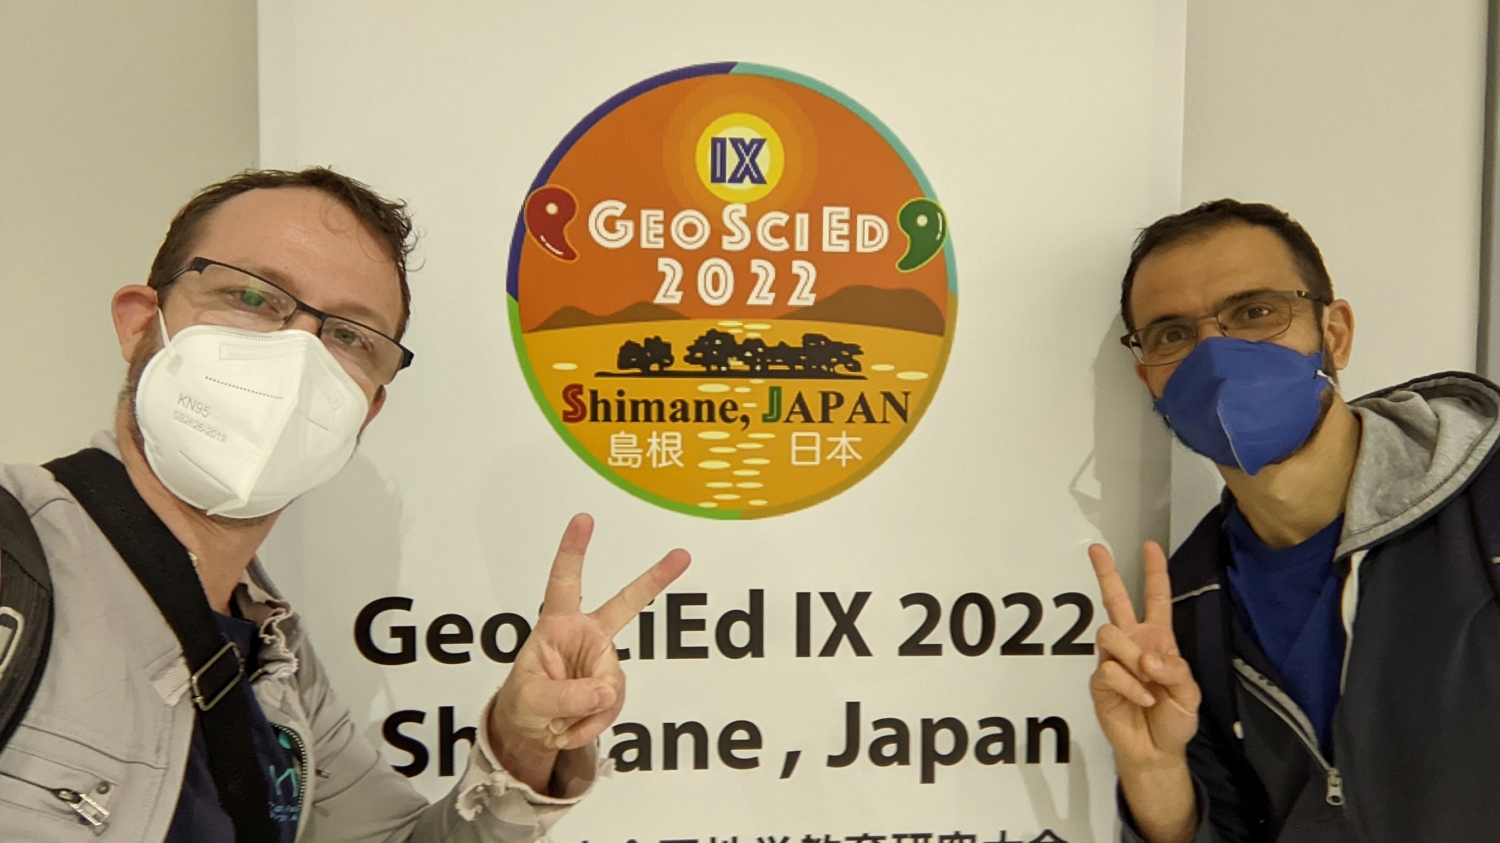 Two men in masks making the peace sign flanking a sign that reads "GeoSciEd IX 2022, Shimane, Japan"